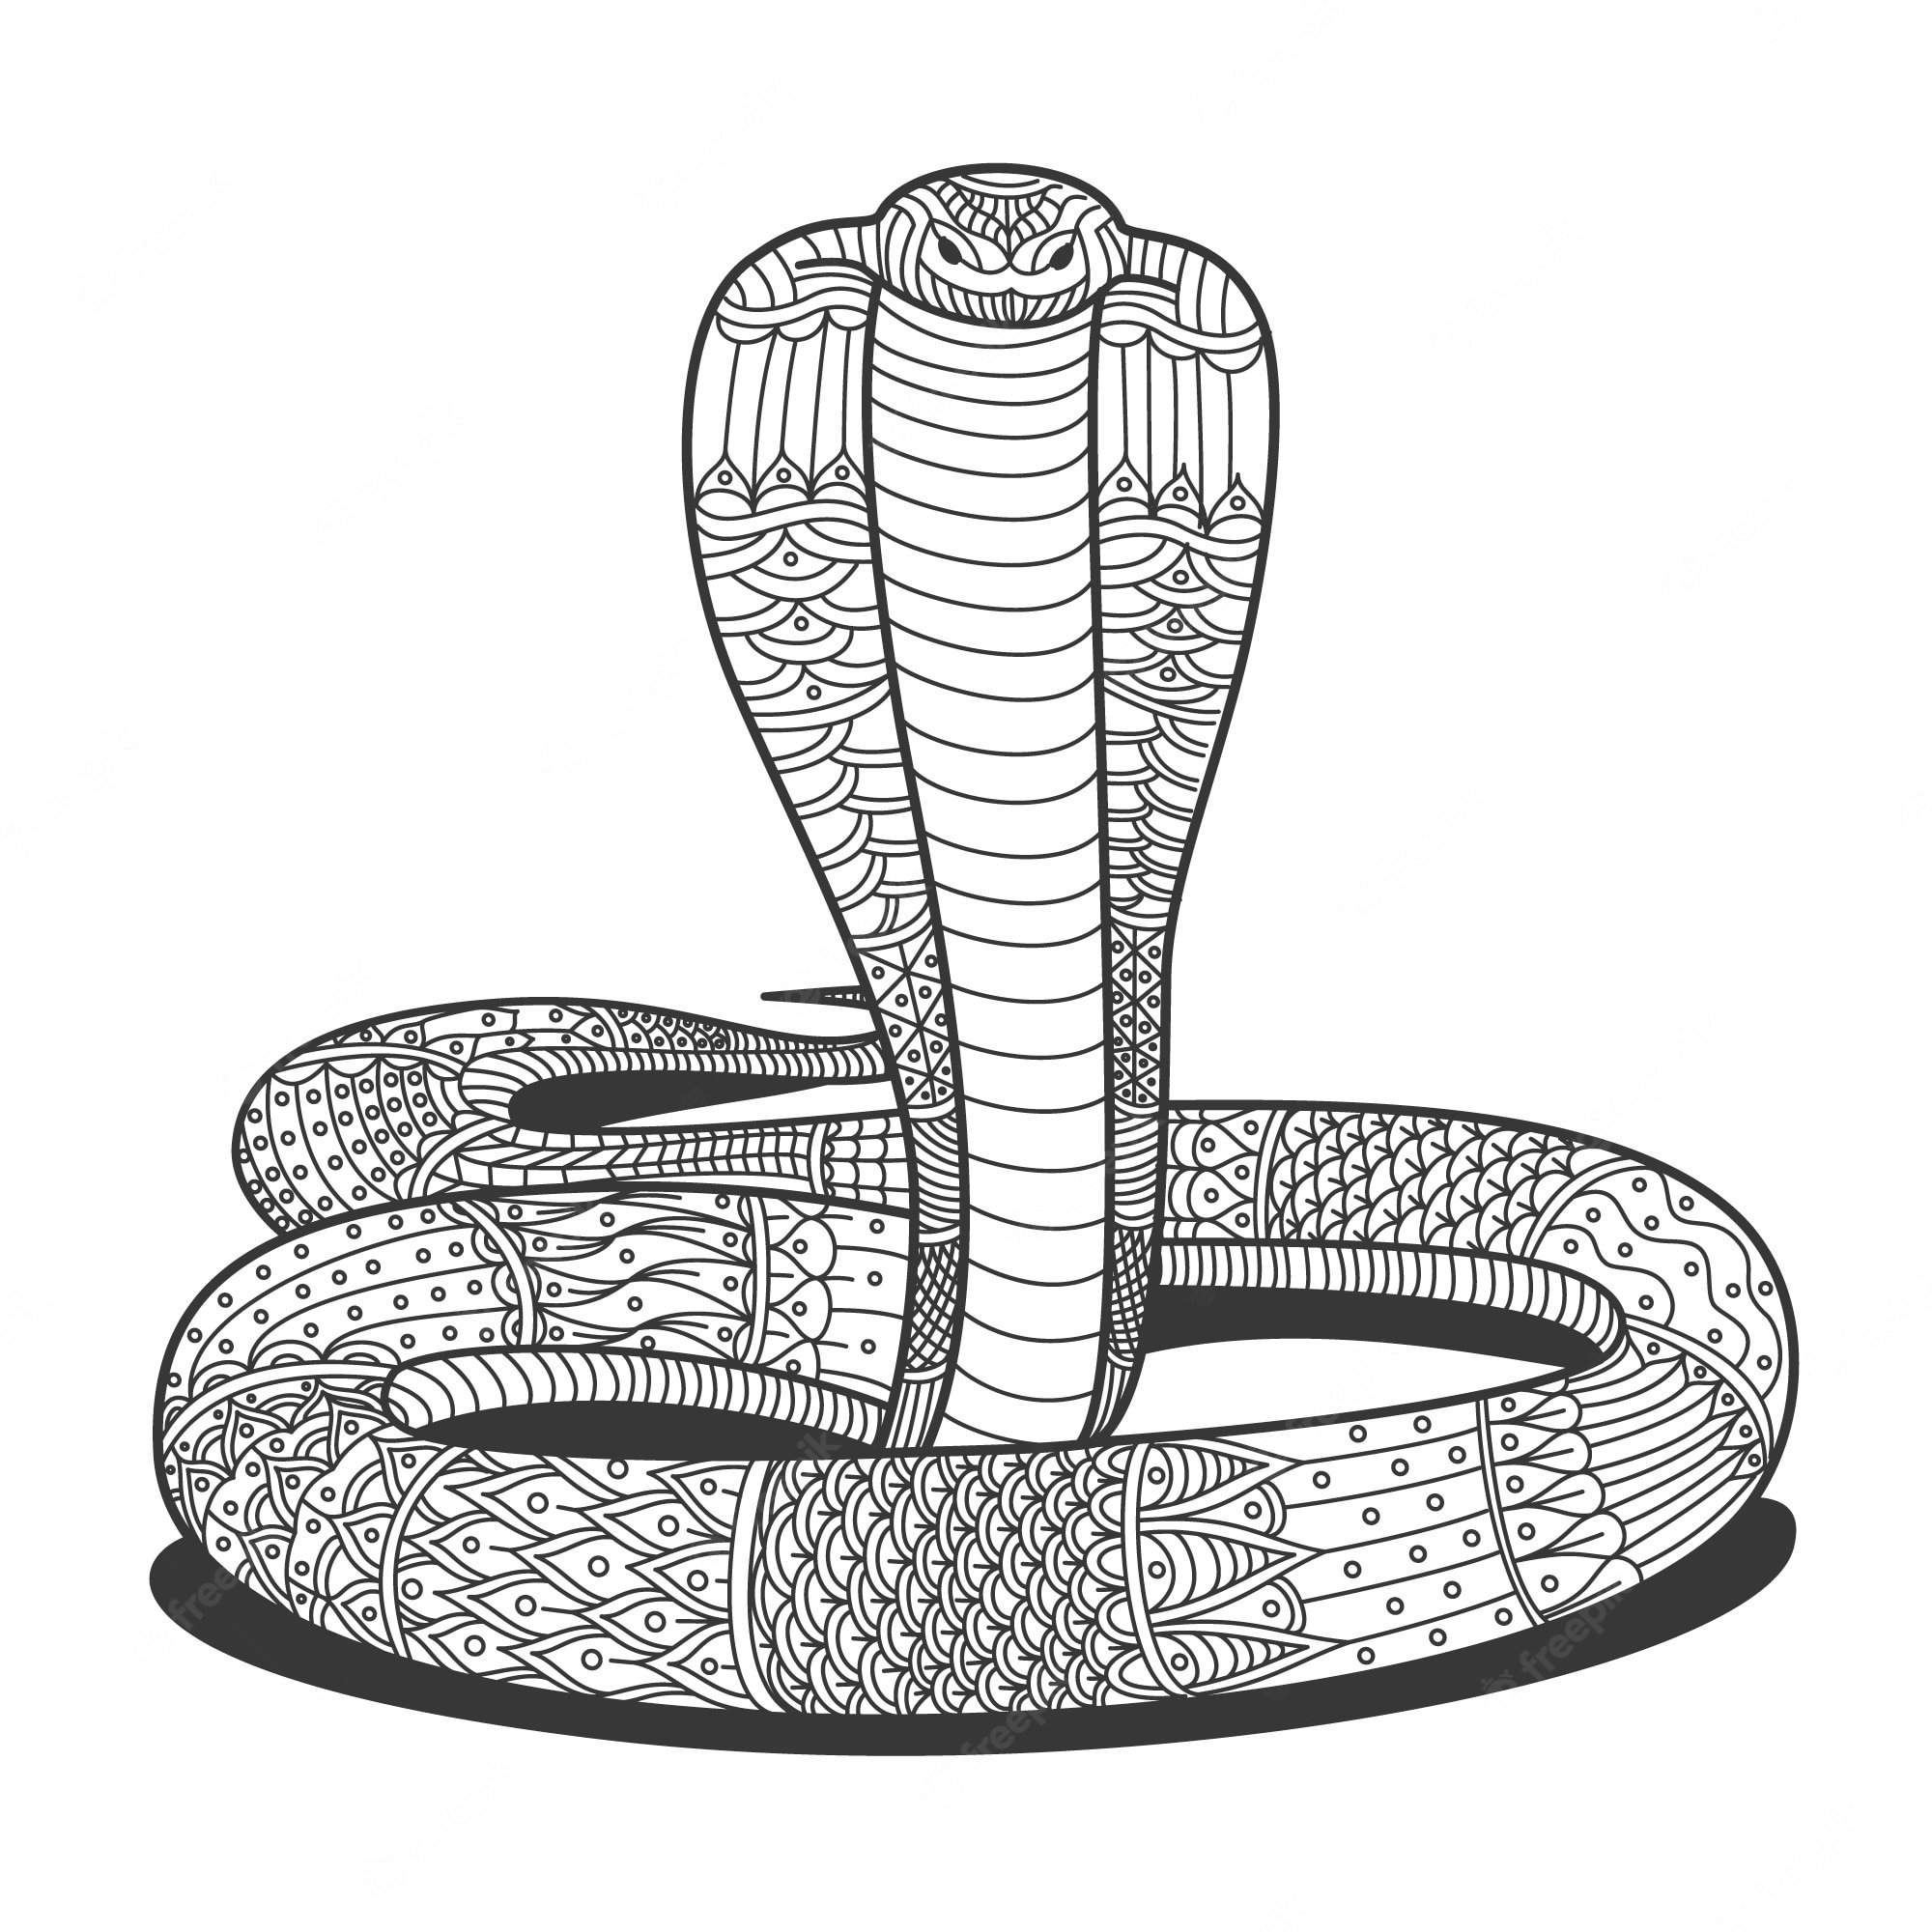 How to Draw a Snake (King Cobra) VIDEO & Step-by-Step Pictures